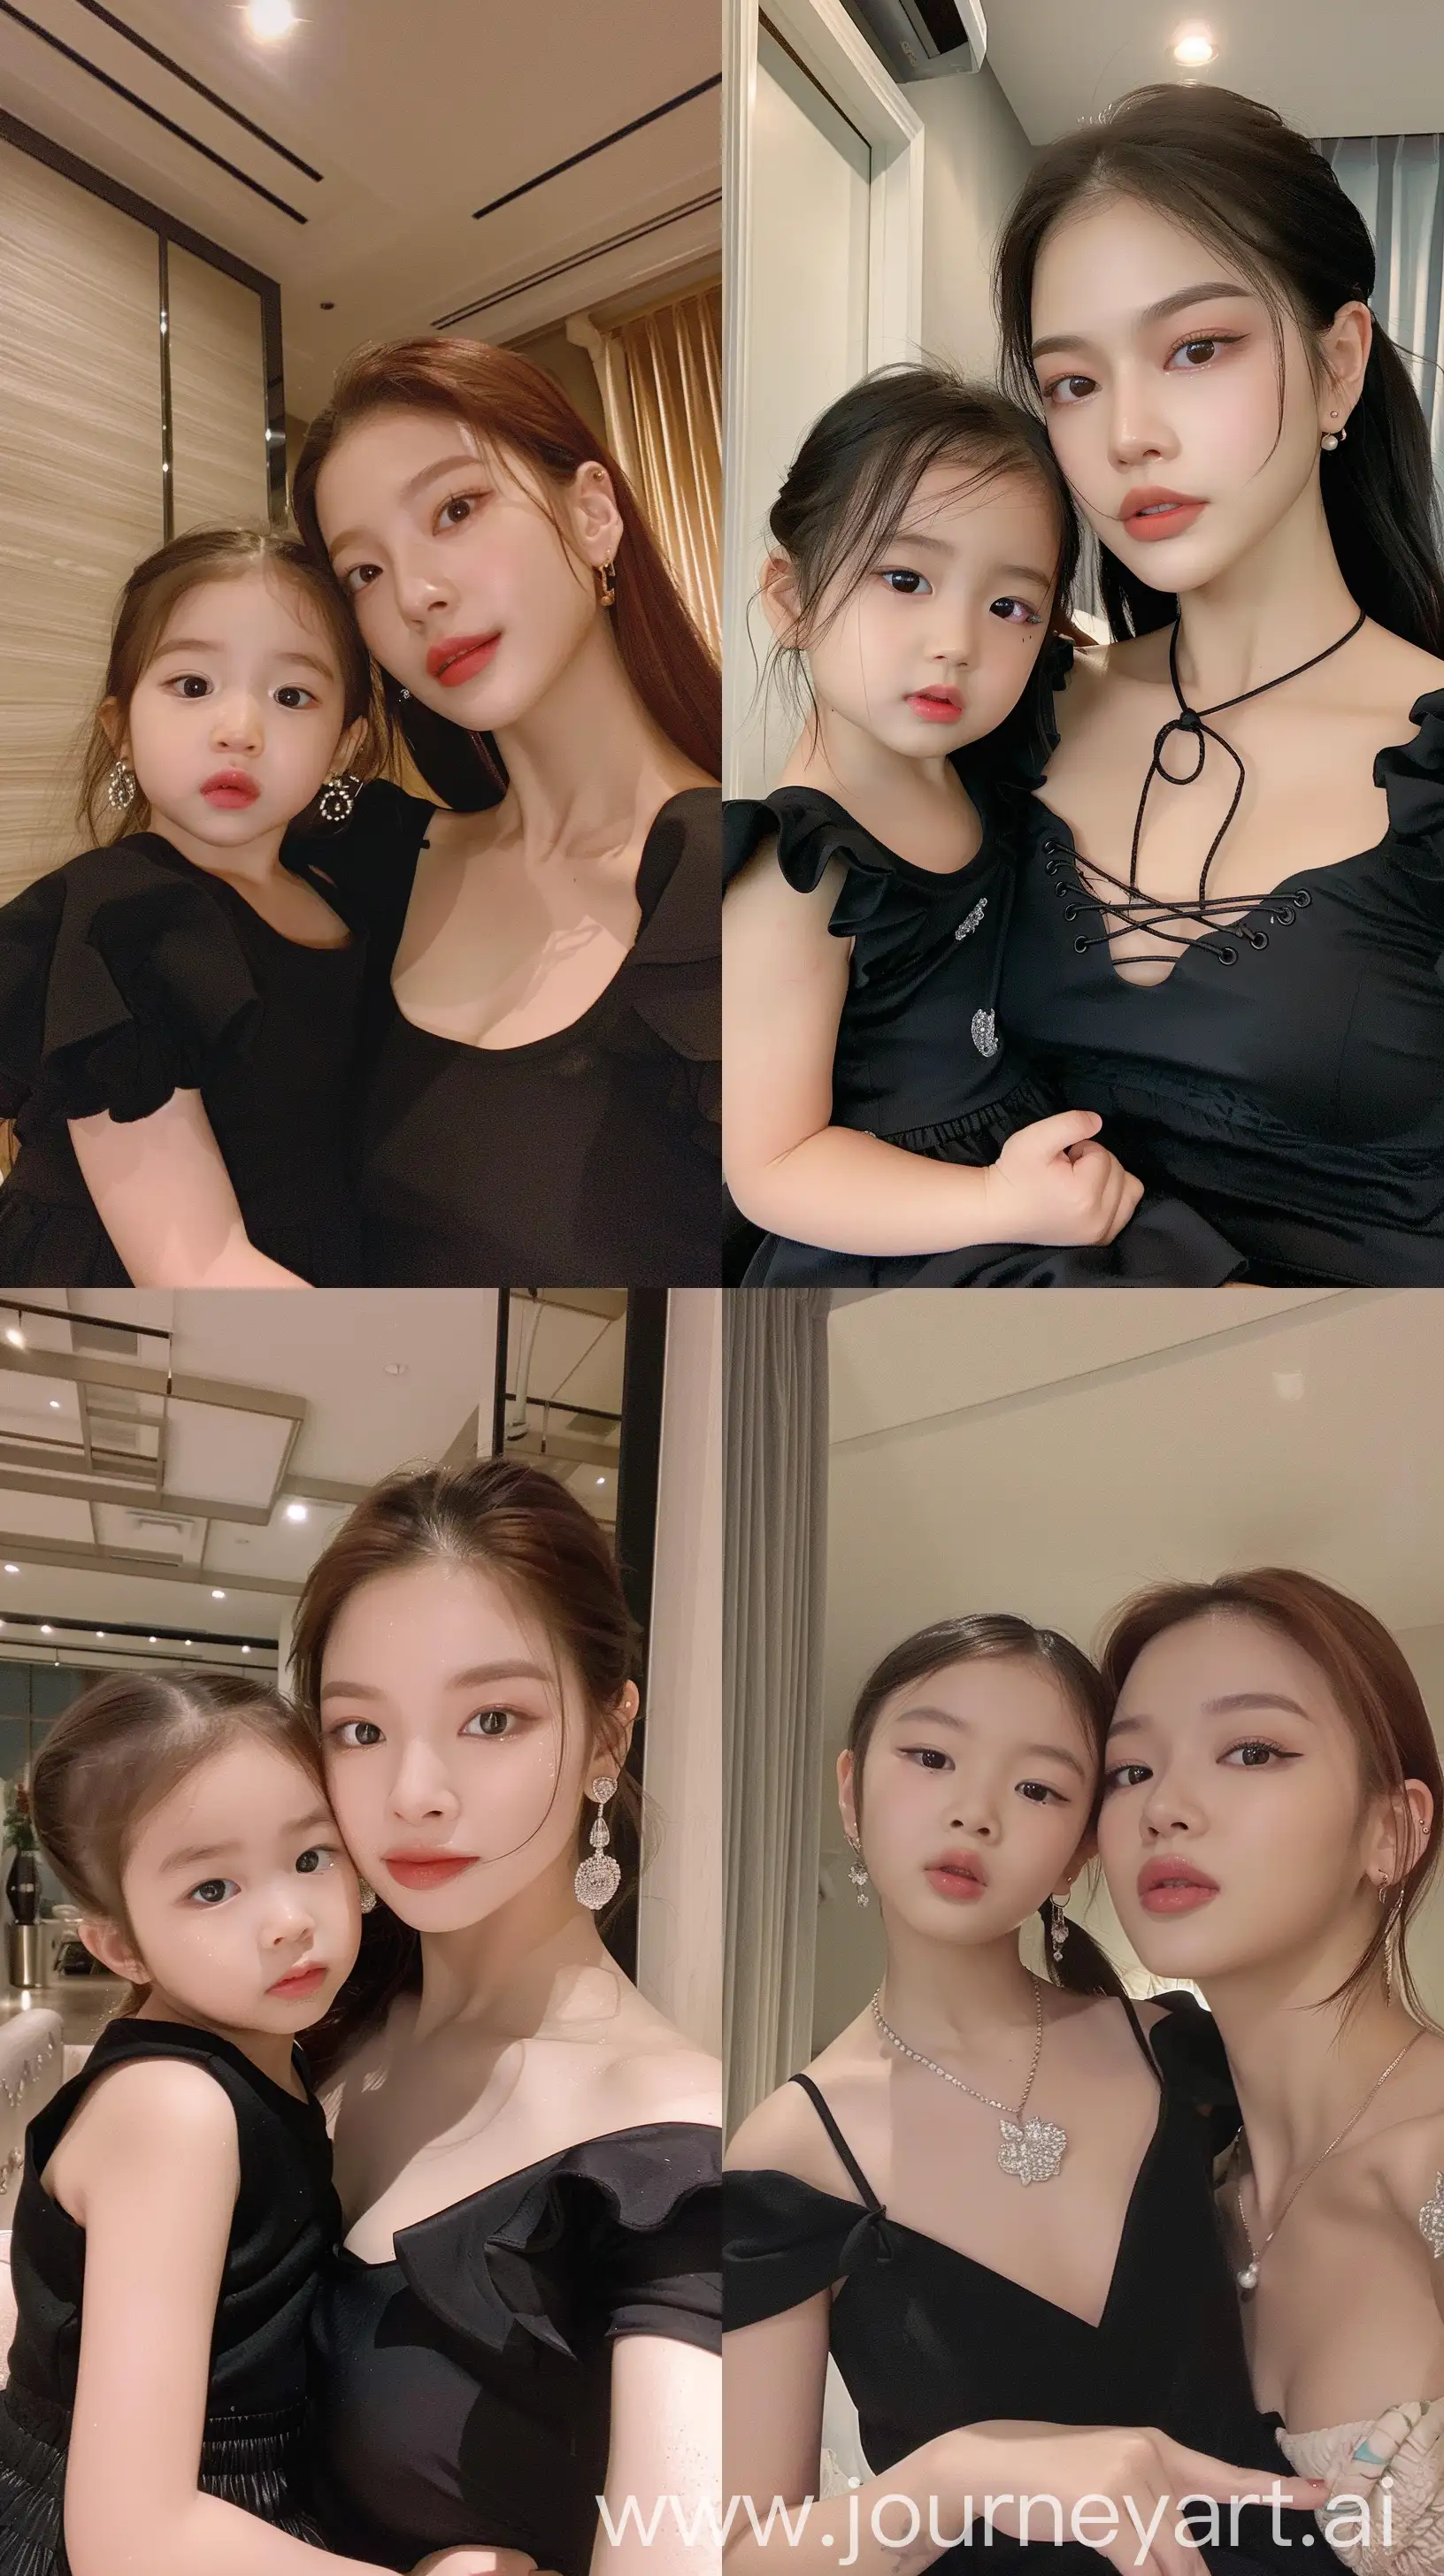 blackpink's jennie selfie with 2 years old  girl, facial feature look a like blackpink's jennie, aestethic selfie, wearing black drezs, night times, aestethic make up,hotly elegant young mom,fatlips --ar 9:16 